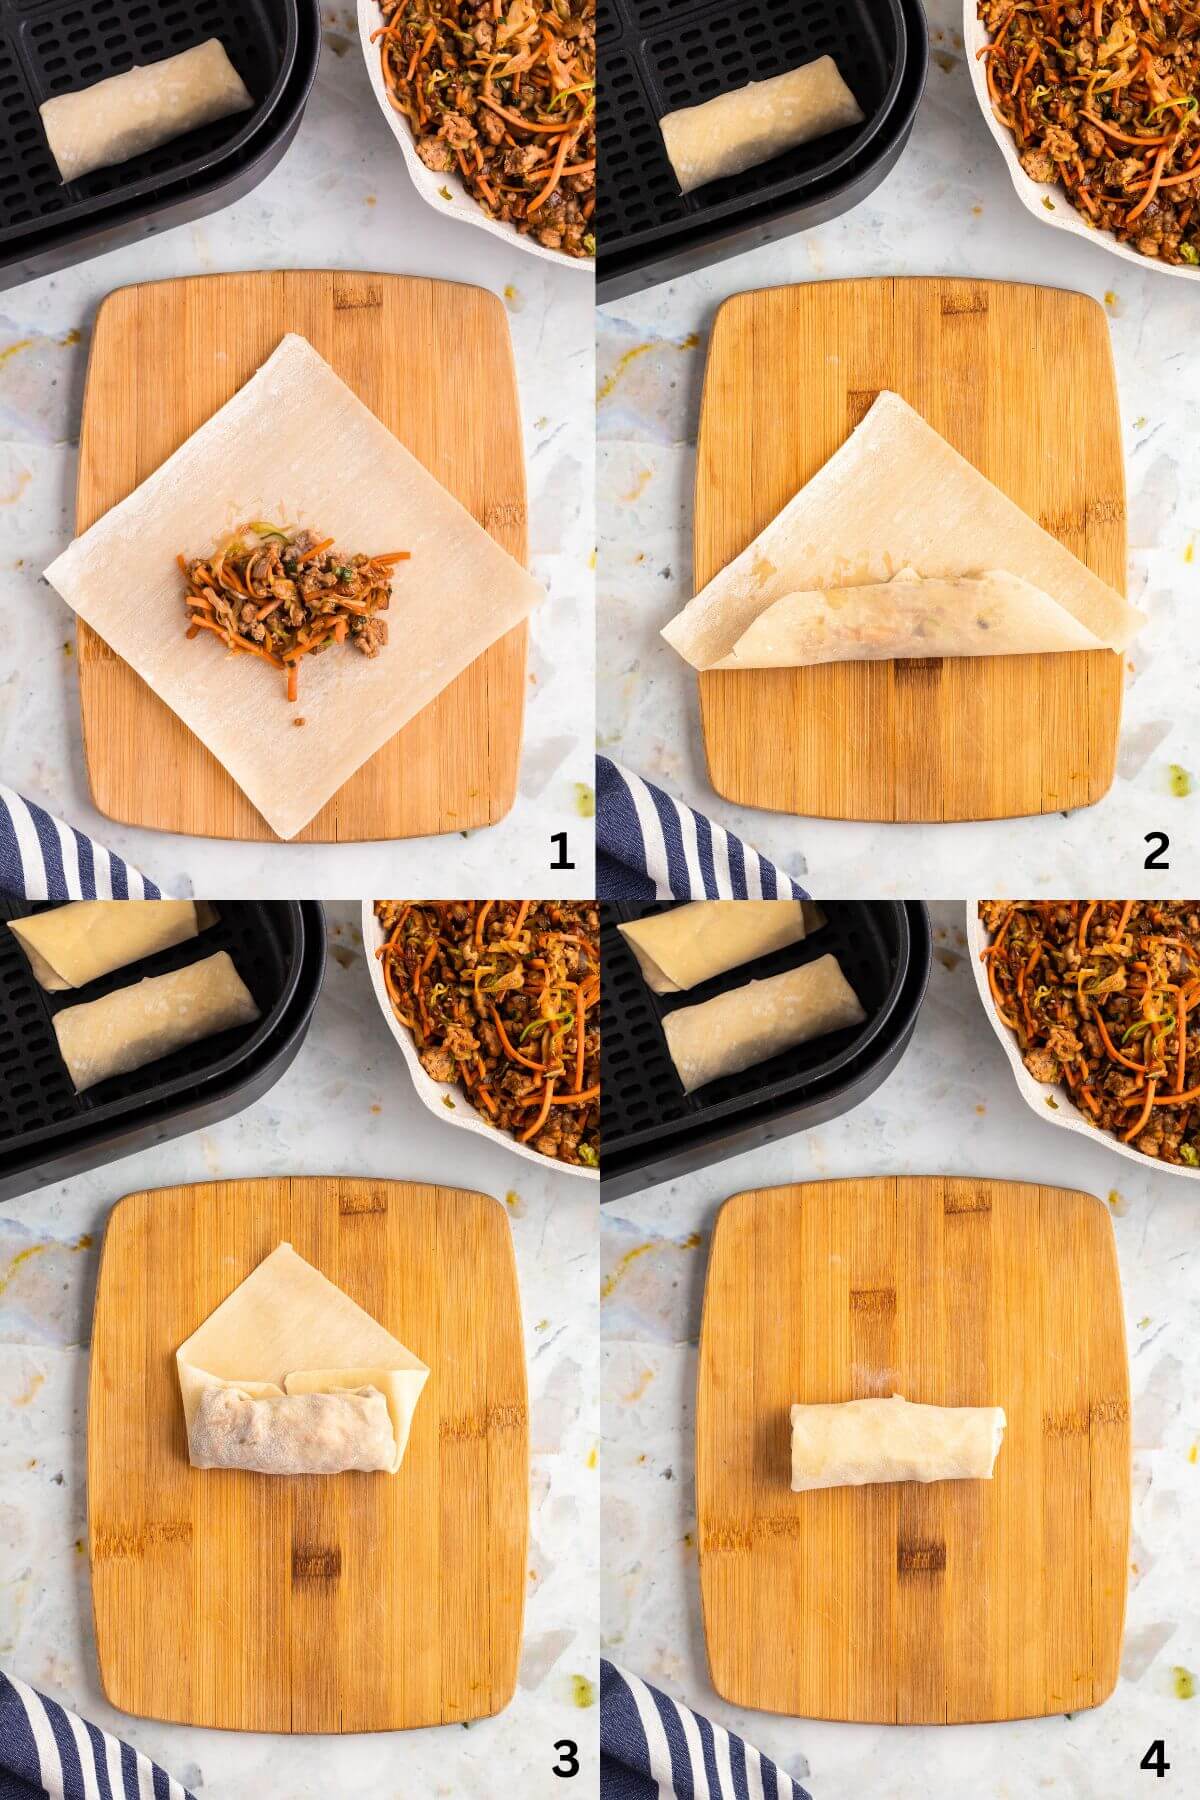 step by step photos showing how to fill and wrap egg rolls.